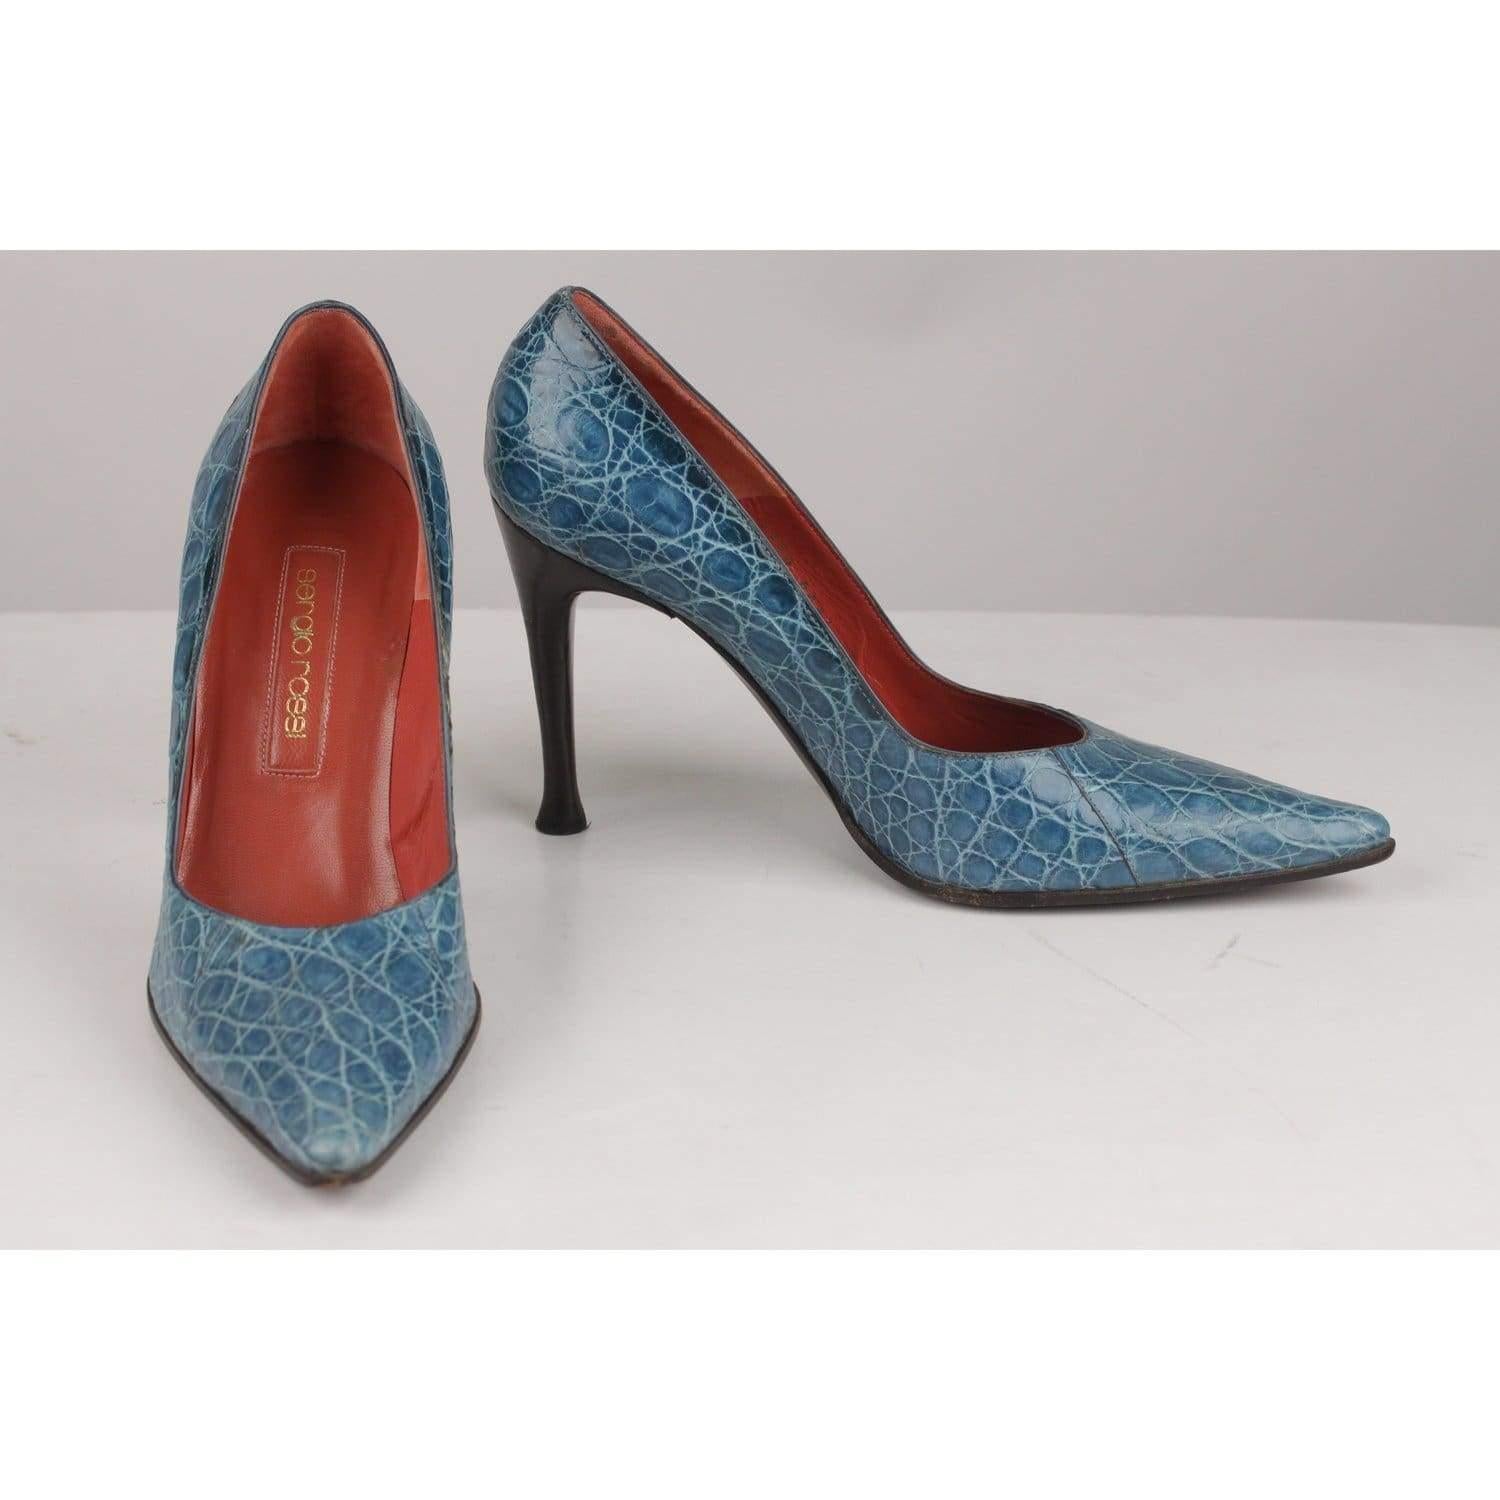 MATERIAL: Leather COLOR: Blue MODEL: Closed toe slip on GENDER: Women SIZE: 38 COUNTRY OF MANUFACTURE: Italy Condition CONDITION DETAILS: B :GOOD CONDITION - Some light wear of use - Light wear of use on the toes, some wear of use on the outsoles -